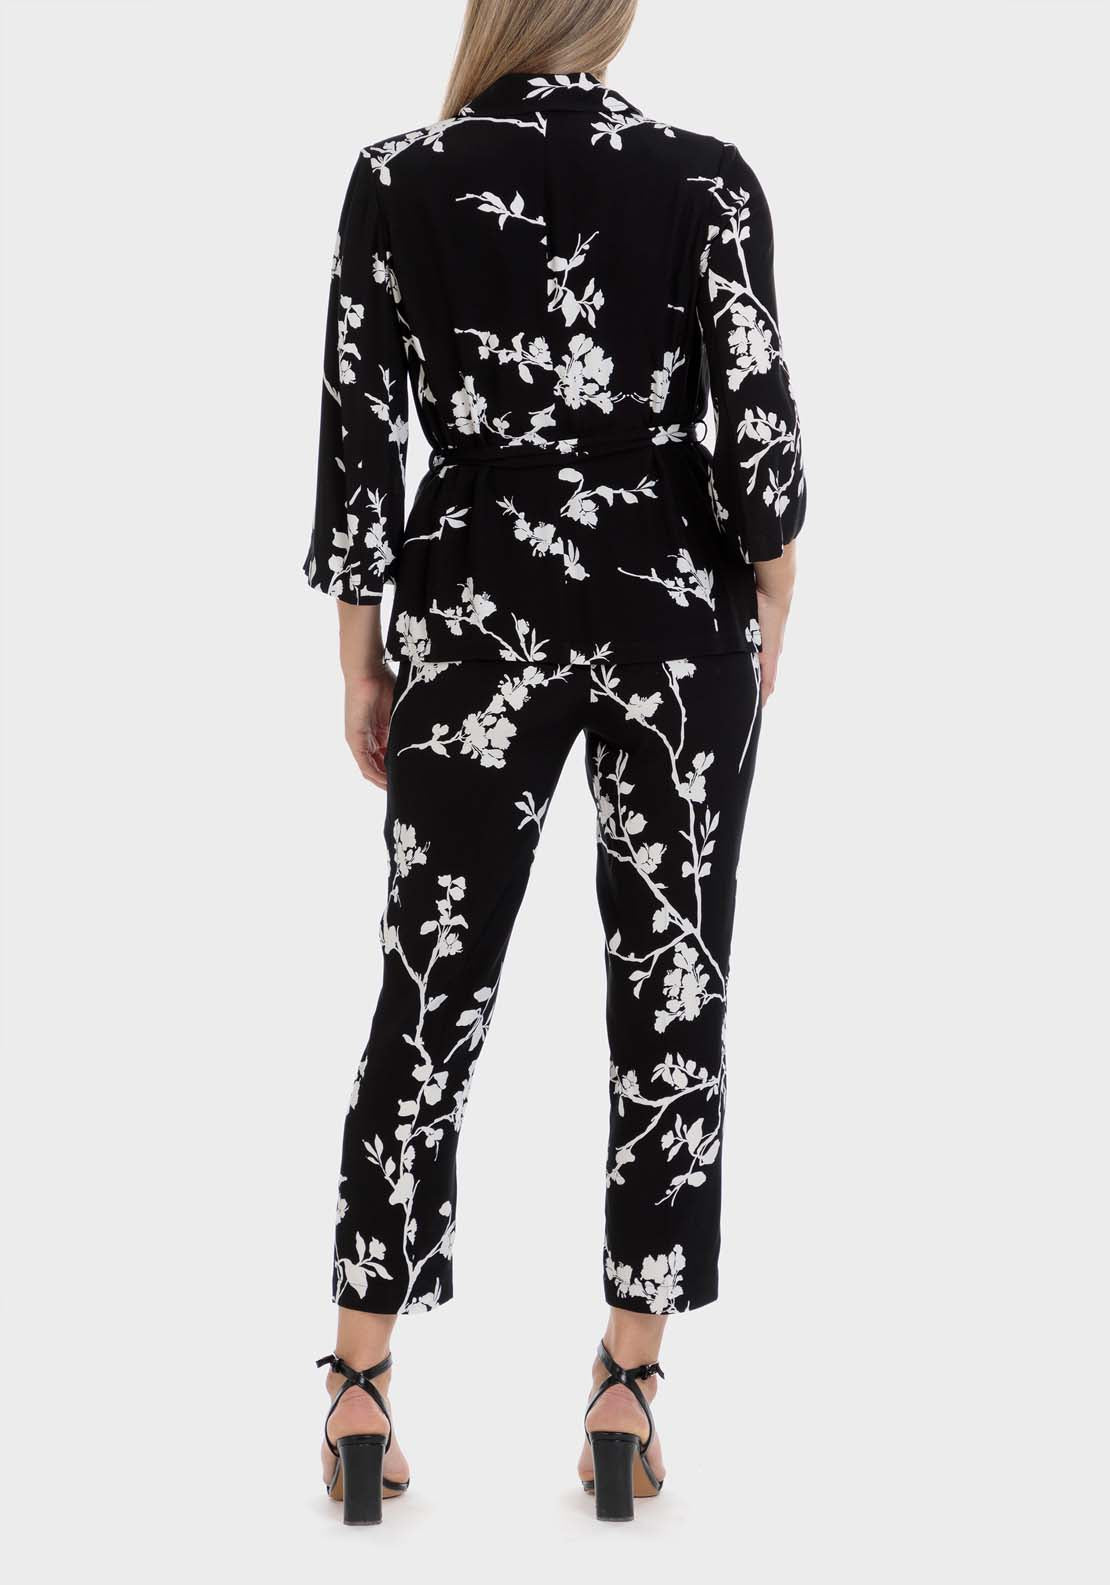 Punt Roma Floral Print Trousers - Black 5 Shaws Department Stores